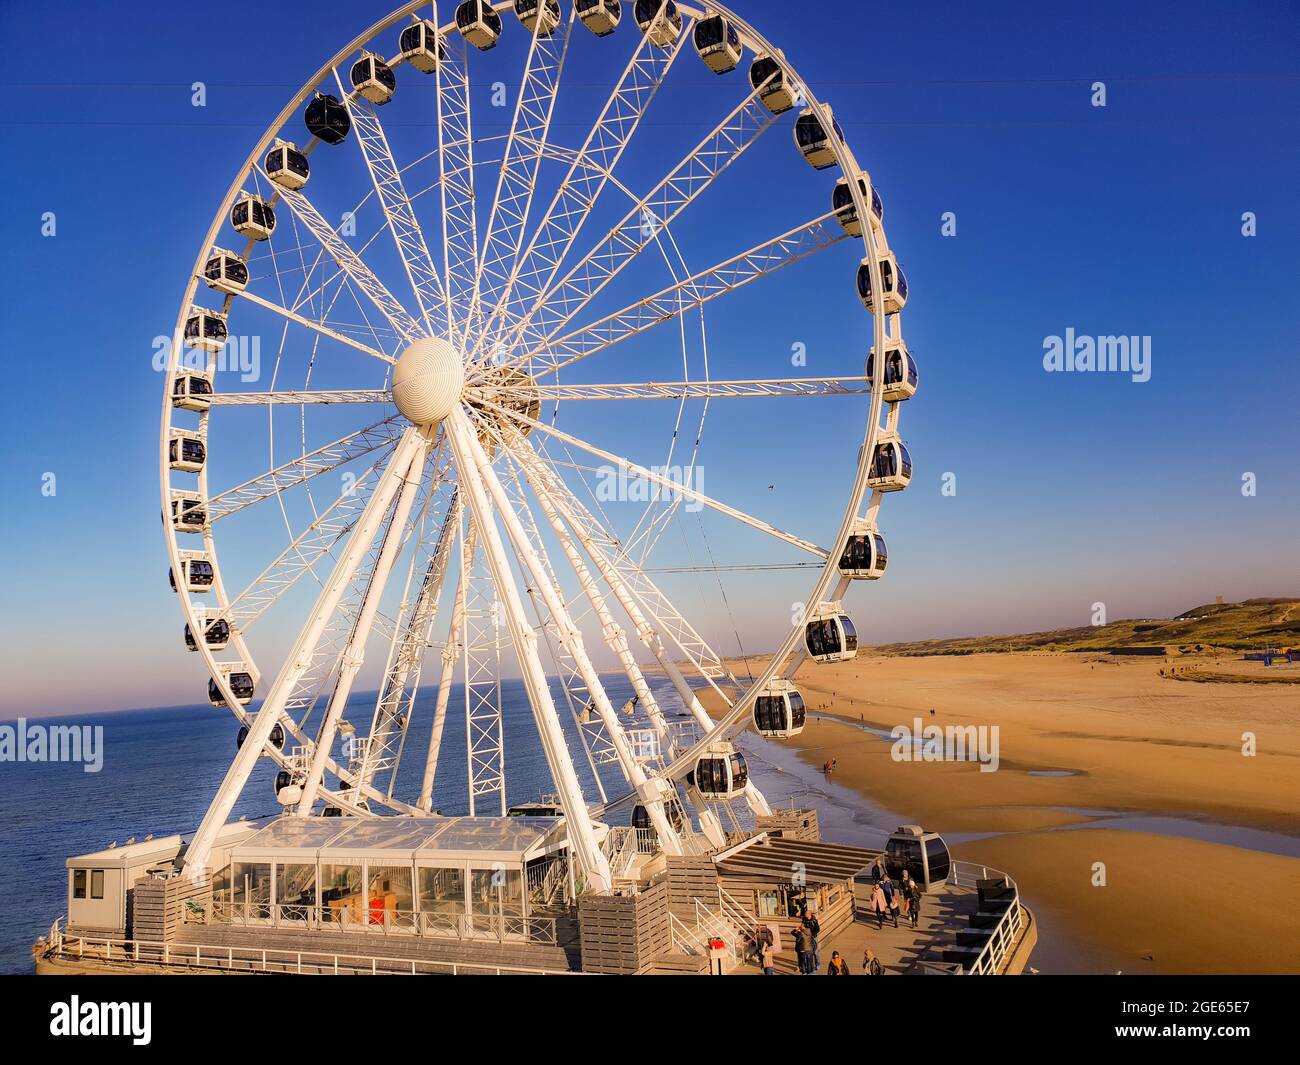 lets go for a ride on the ferris wheel Stock Photo